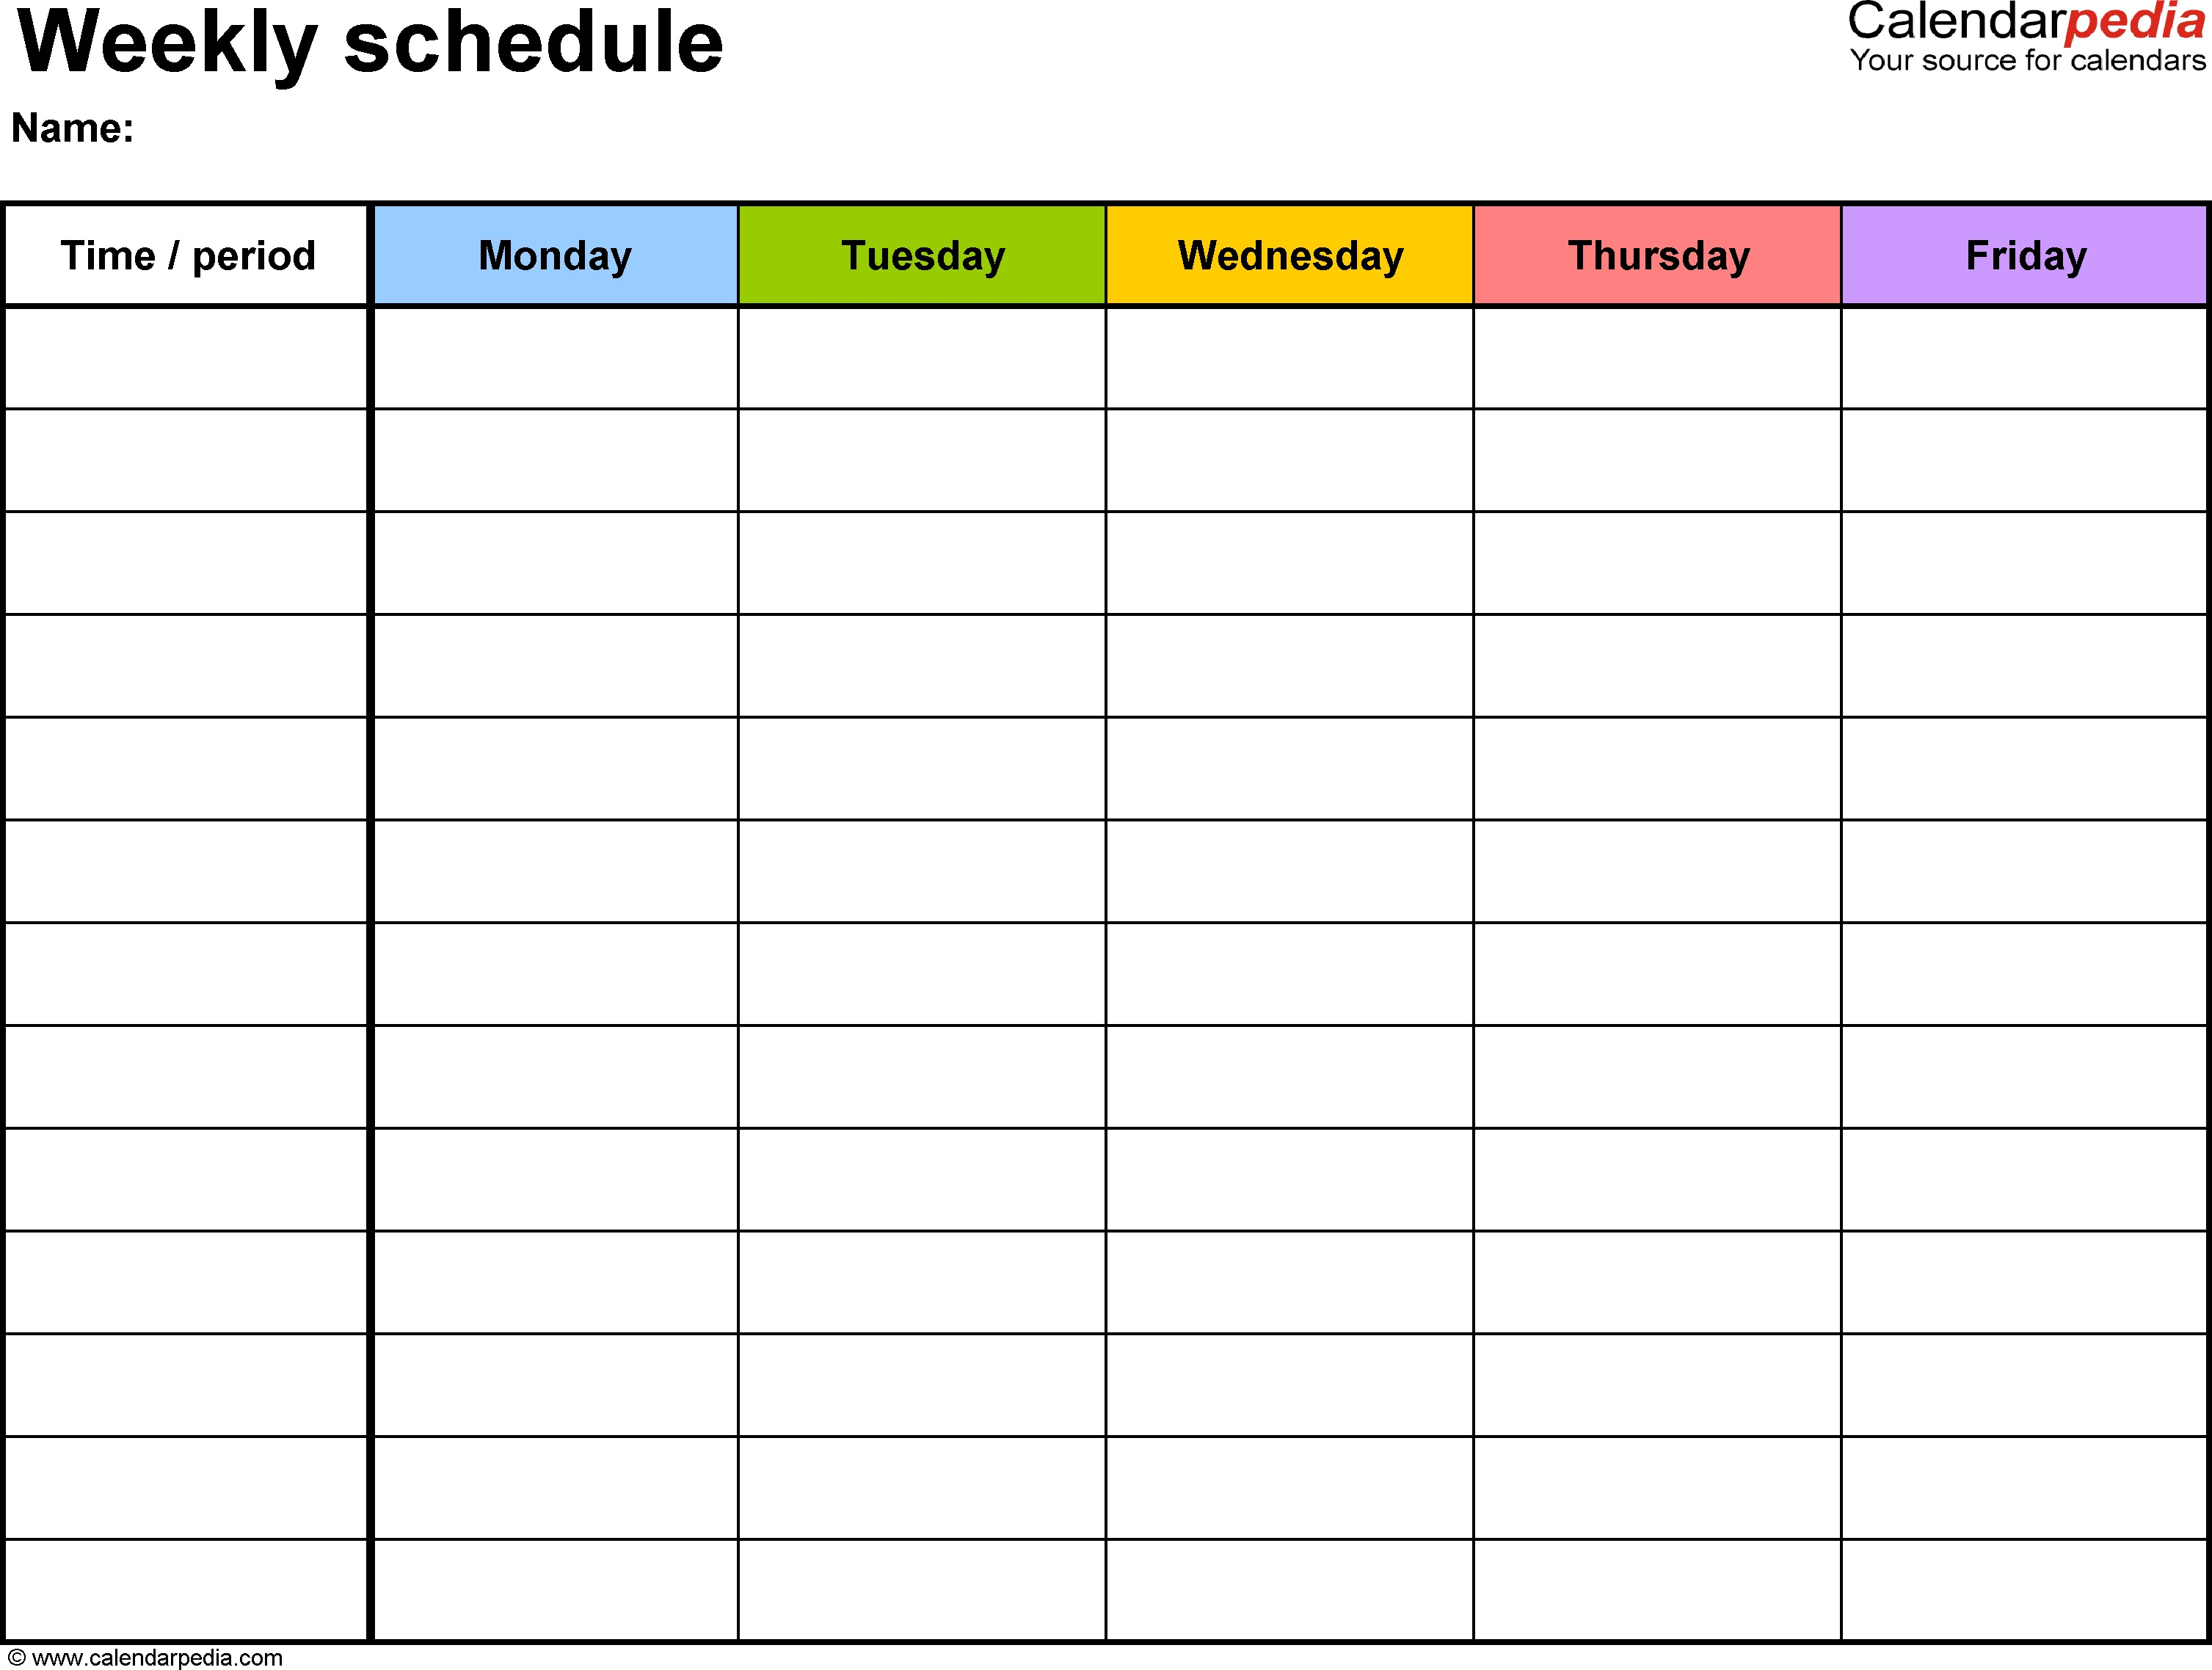 Weekly Schedule Template For Word Version 1: Landscape, 1 5 Day Calendar Template Excel